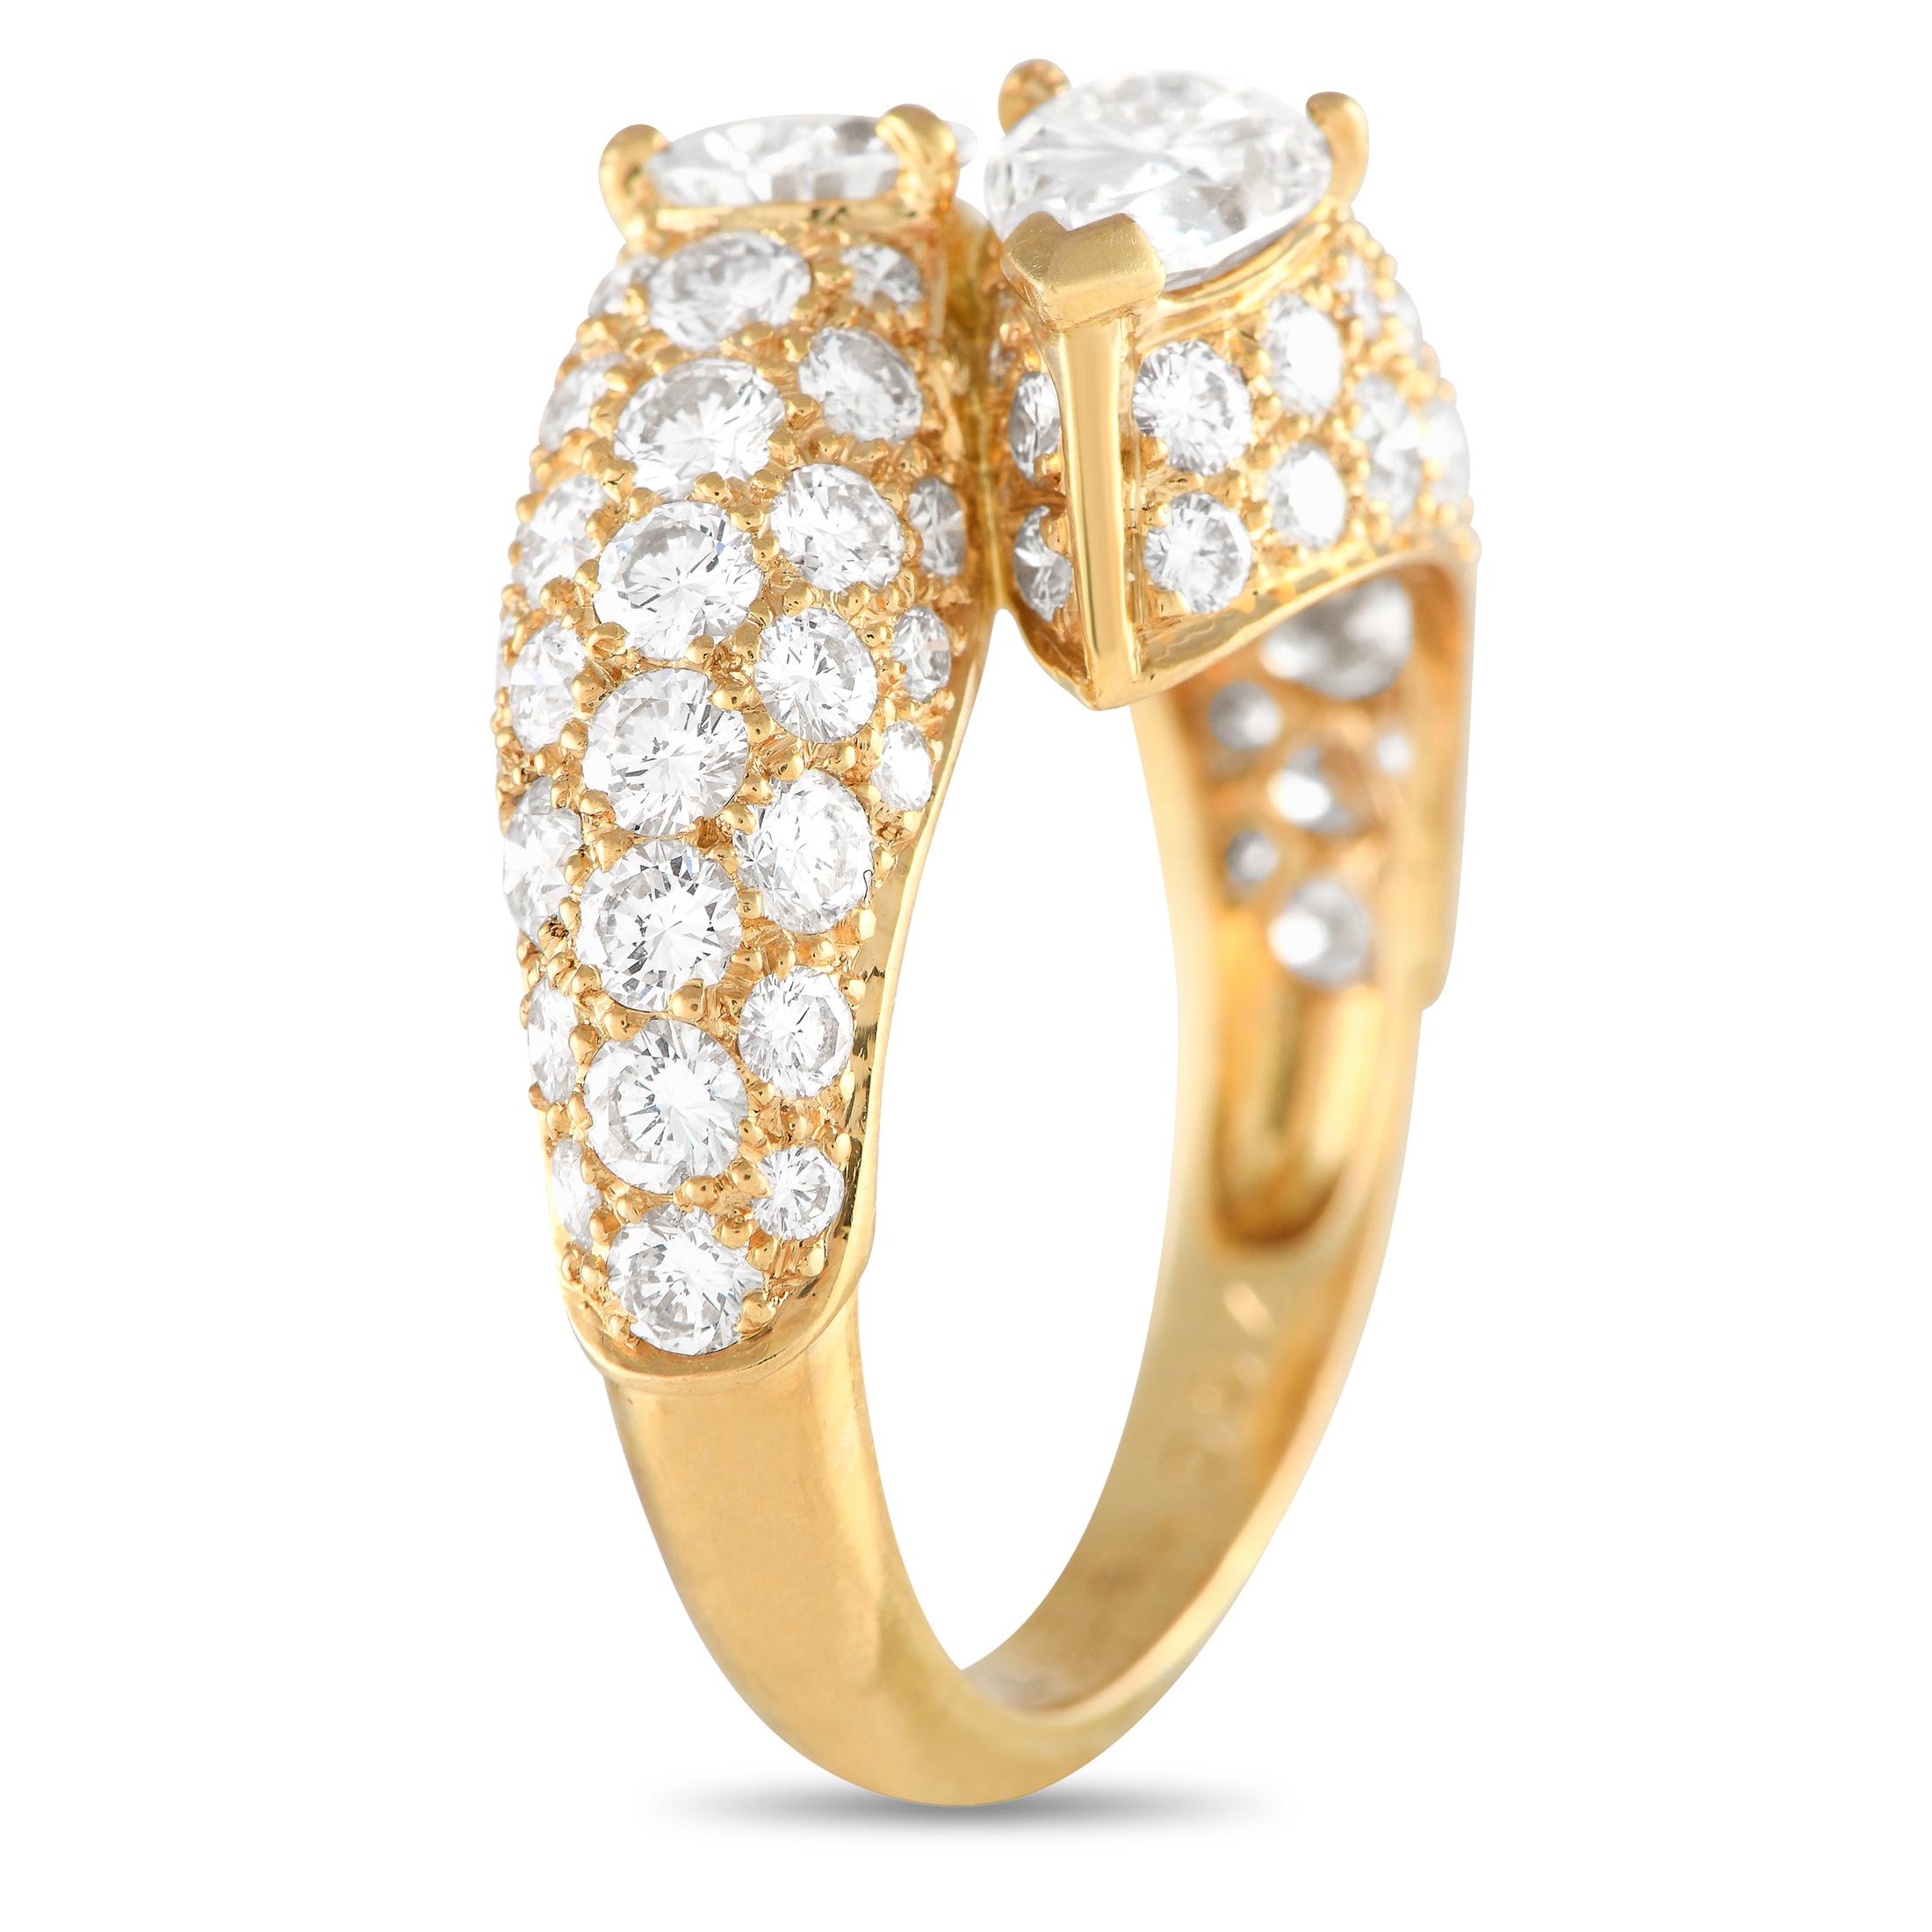 This Cartier ring will effortlessly radiate light. A 0.60 carat pear-shaped diamond and a 0.62 carat pear-shaped diamond with E color and VS1 clarity make a statement at the center of this ring’s elegant 18K Yellow Gold setting. Additional diamonds